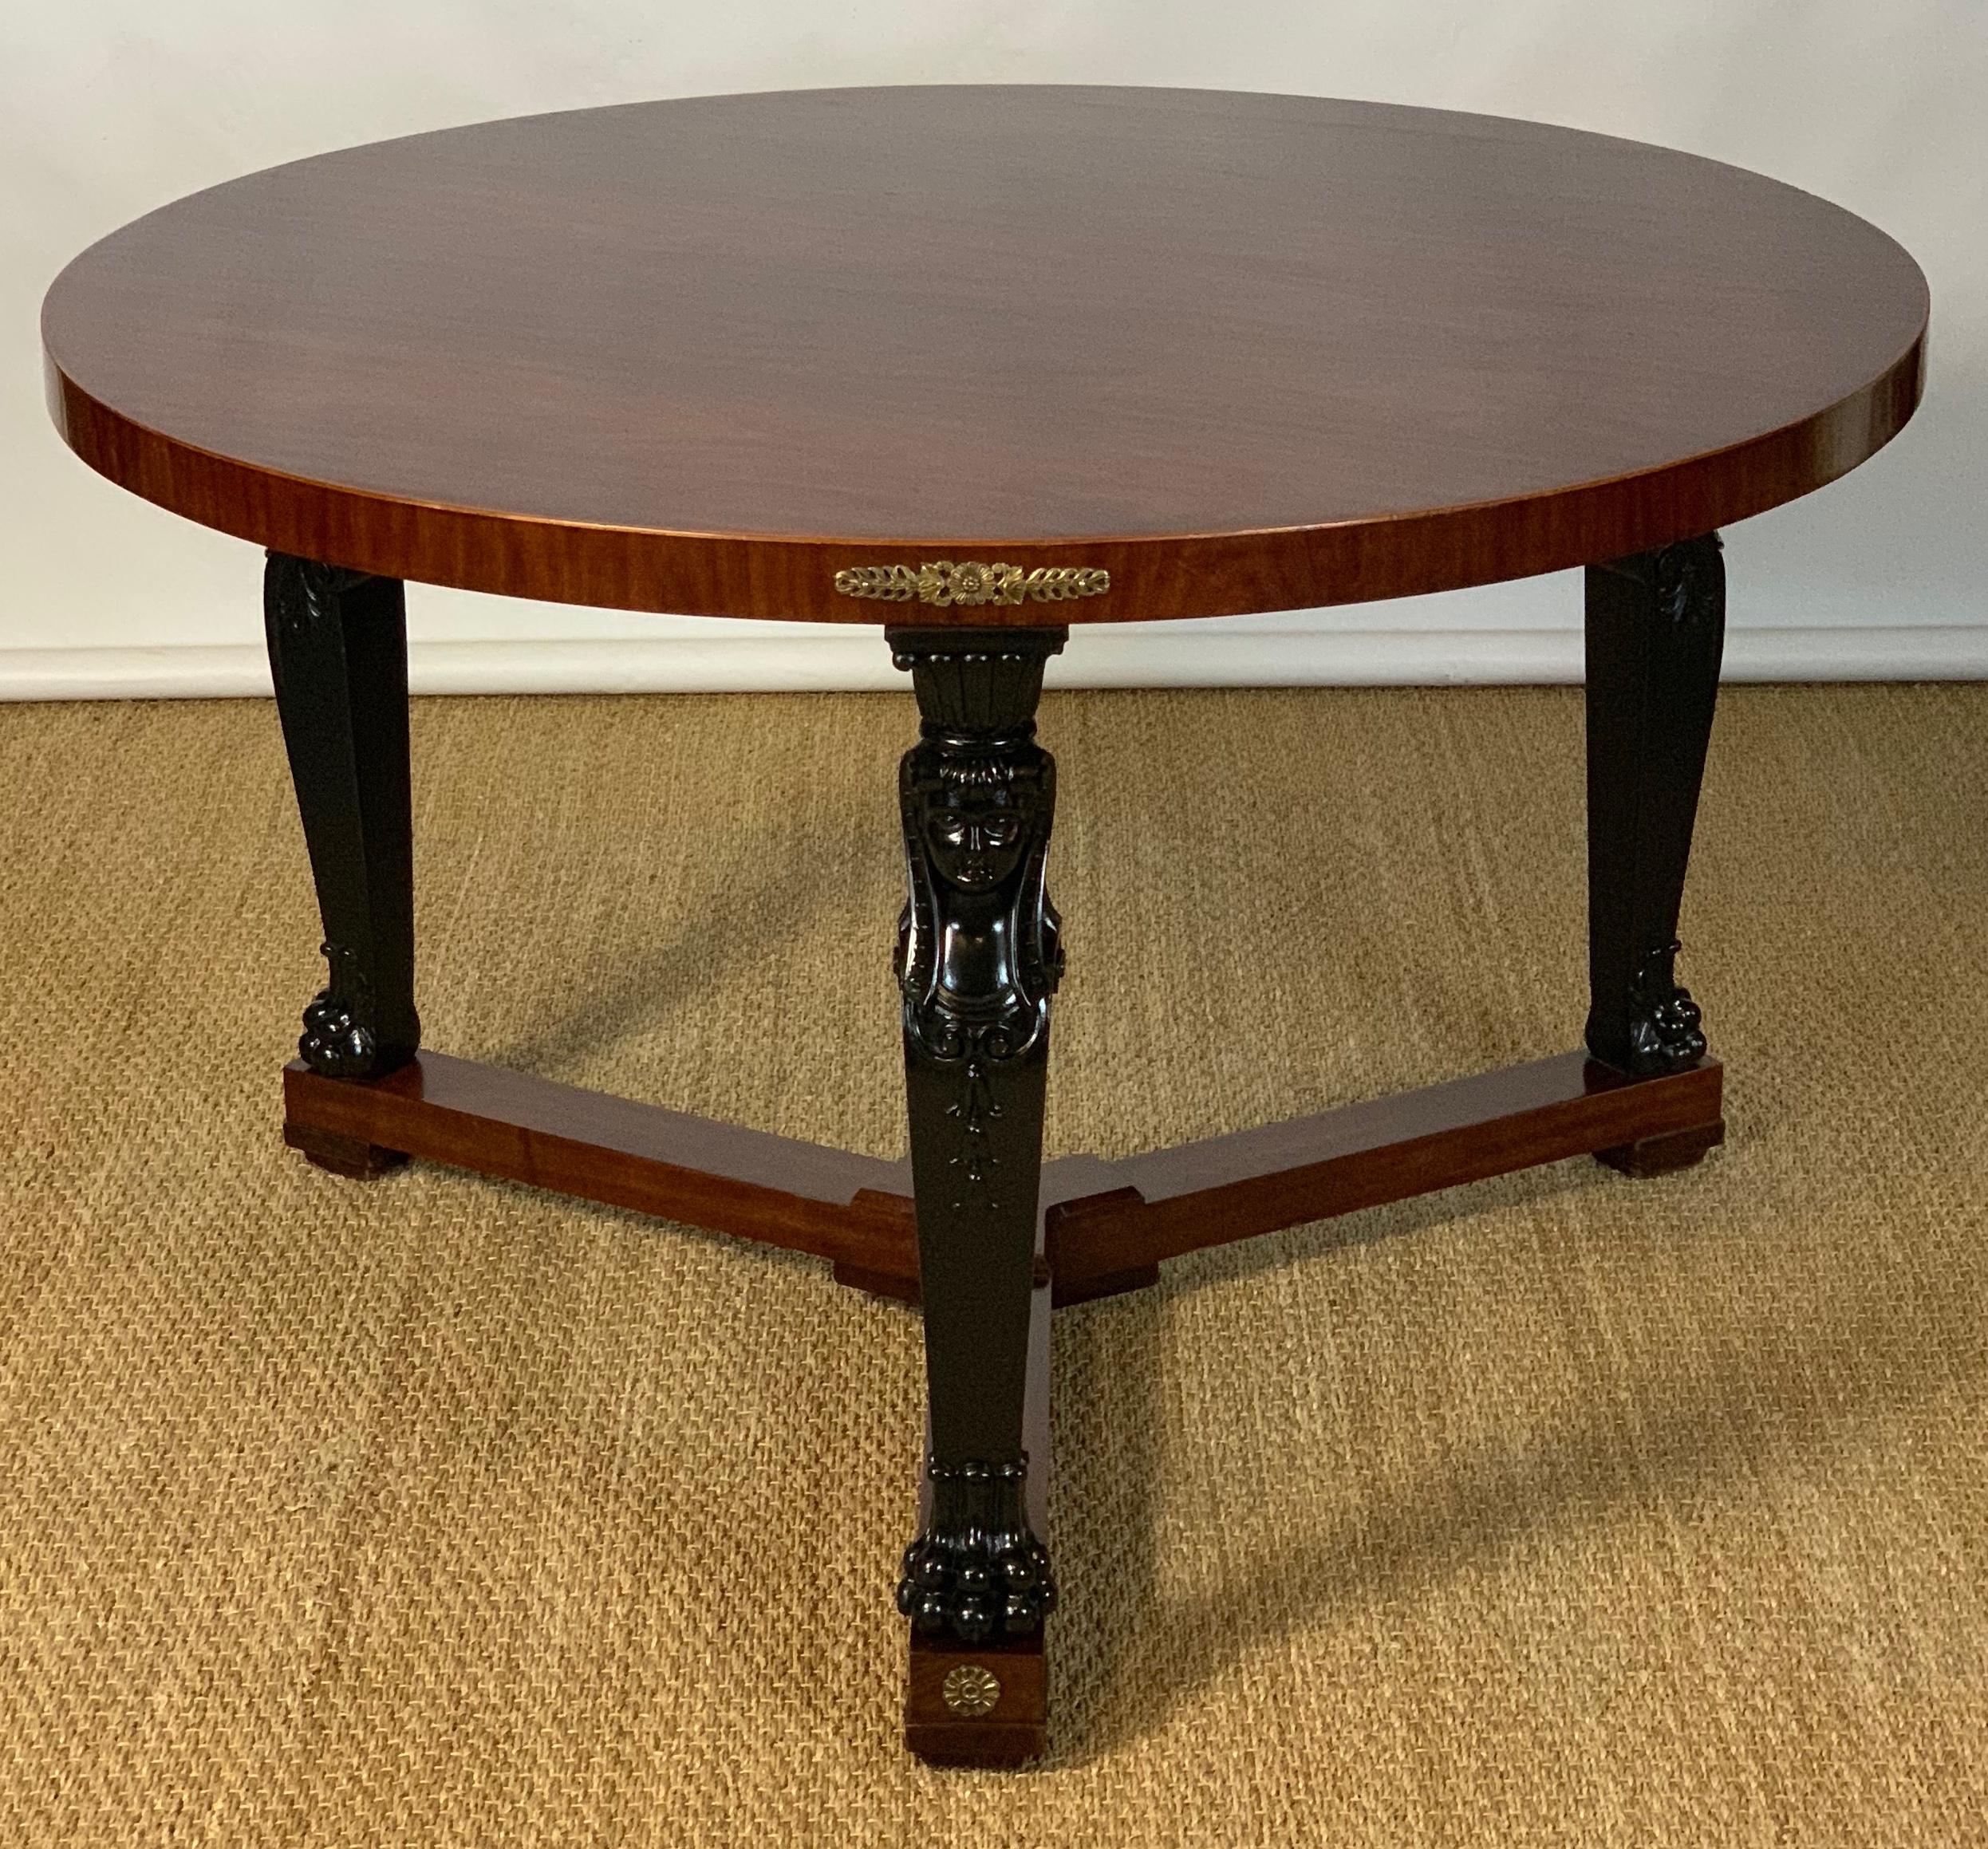 A large and elegant mid-20th century French Empire style mahogany center or library table accented with ebonized caryatid legs and ormolu mounts.